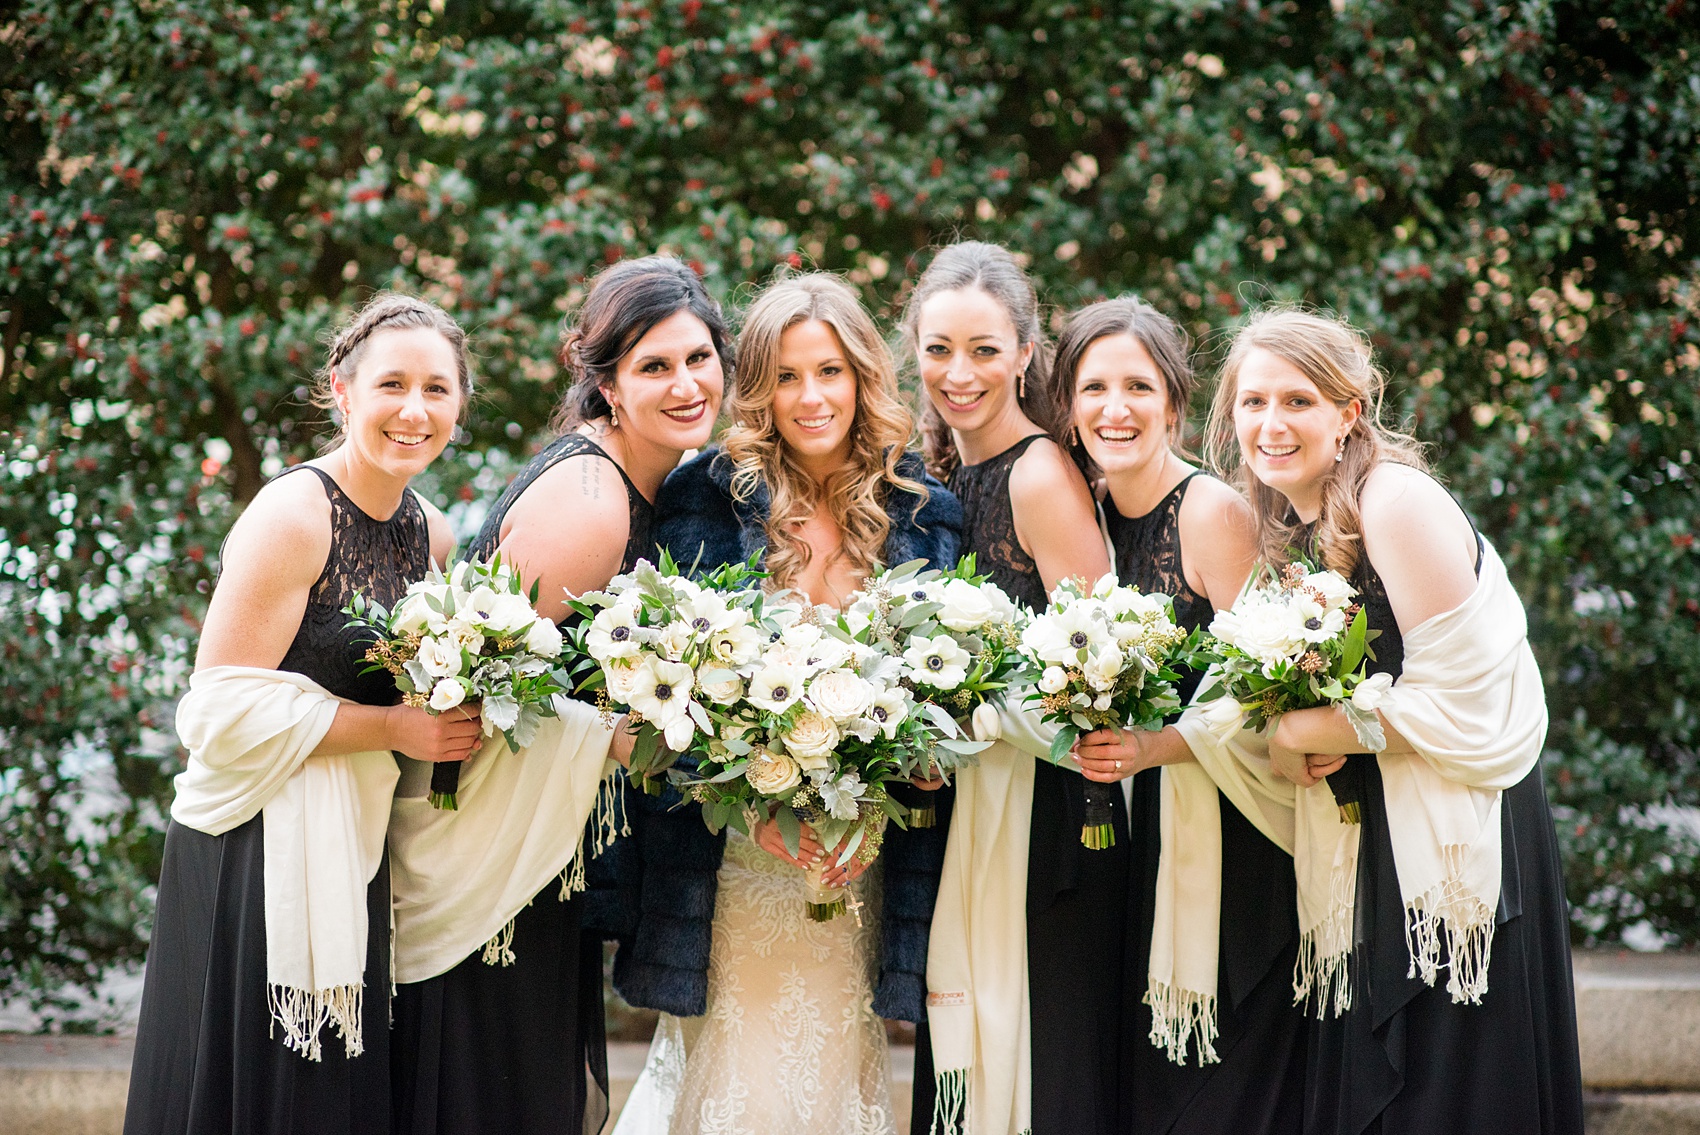 Wedding photos at Sleepy Hollow Country Club for a winter reception in January by Mikkel Paige Photography. The bridal party is pictured with white shawls and black lace gowns, surrounding the bride for her winter wedding. 